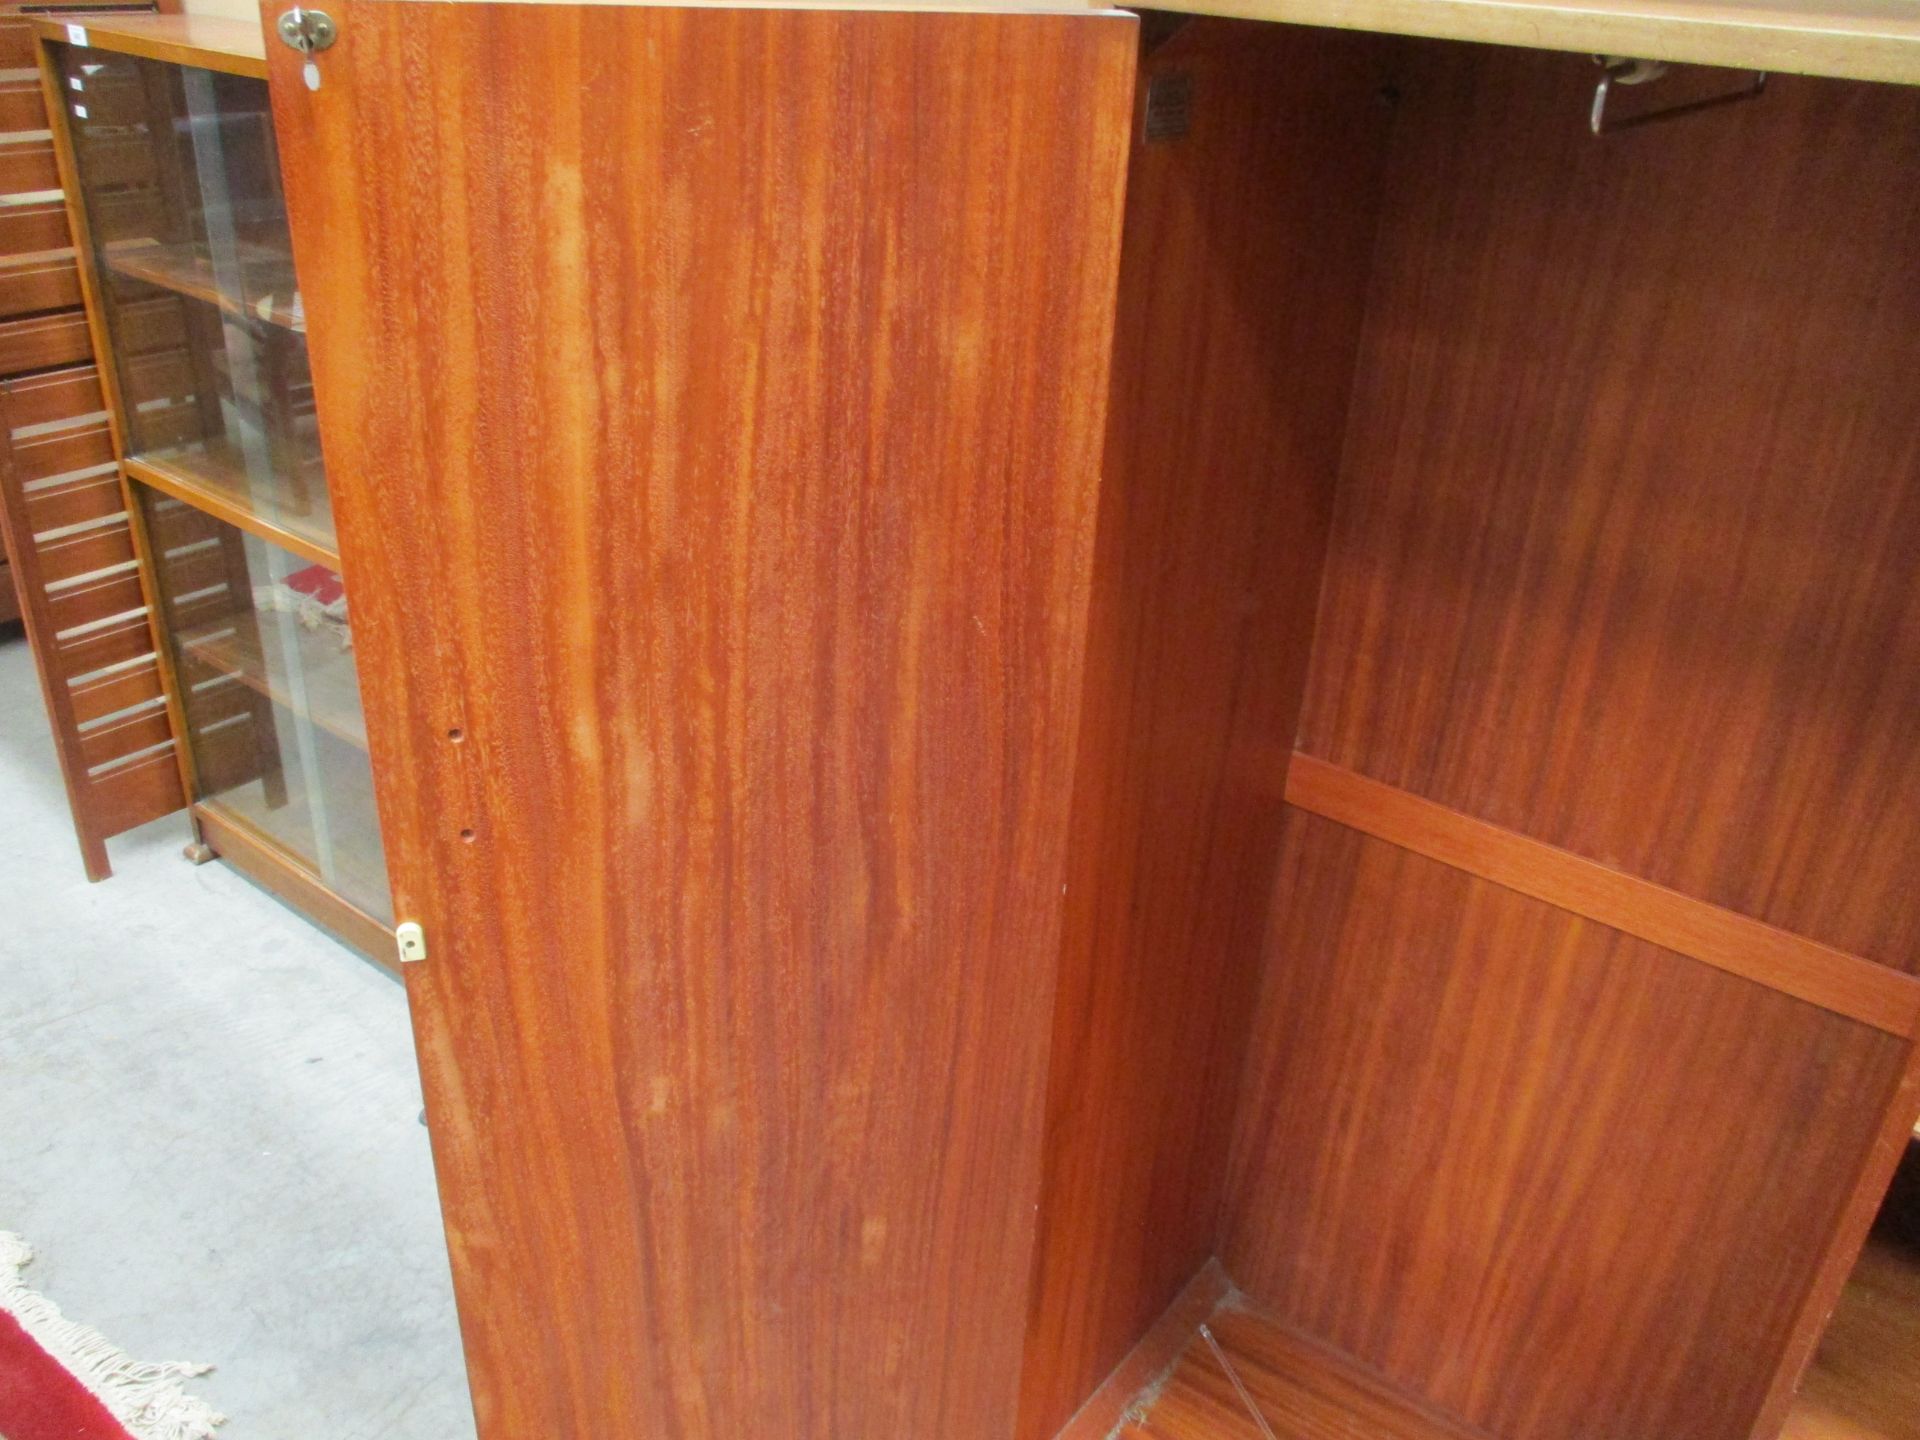 A teak and metal framed Staples Ladderax (with label) wall unit with cupboards, - Image 6 of 6